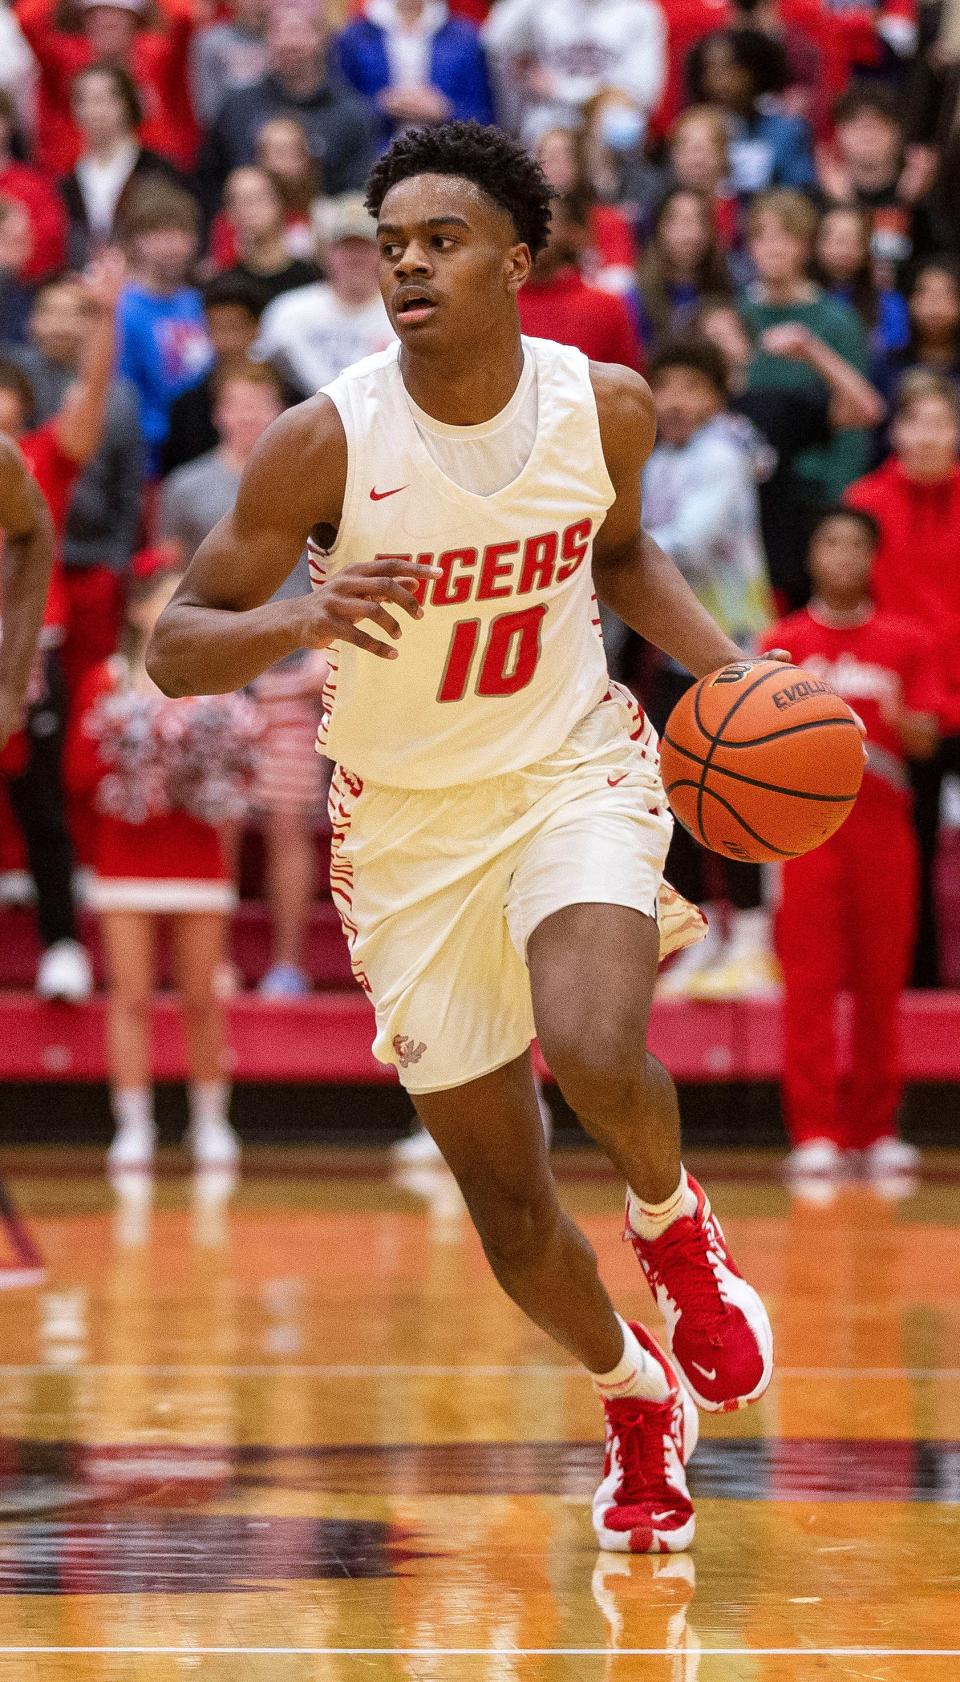 Fishers' Jalen Haralson drives down the court versus Pike on January 7, 2022.